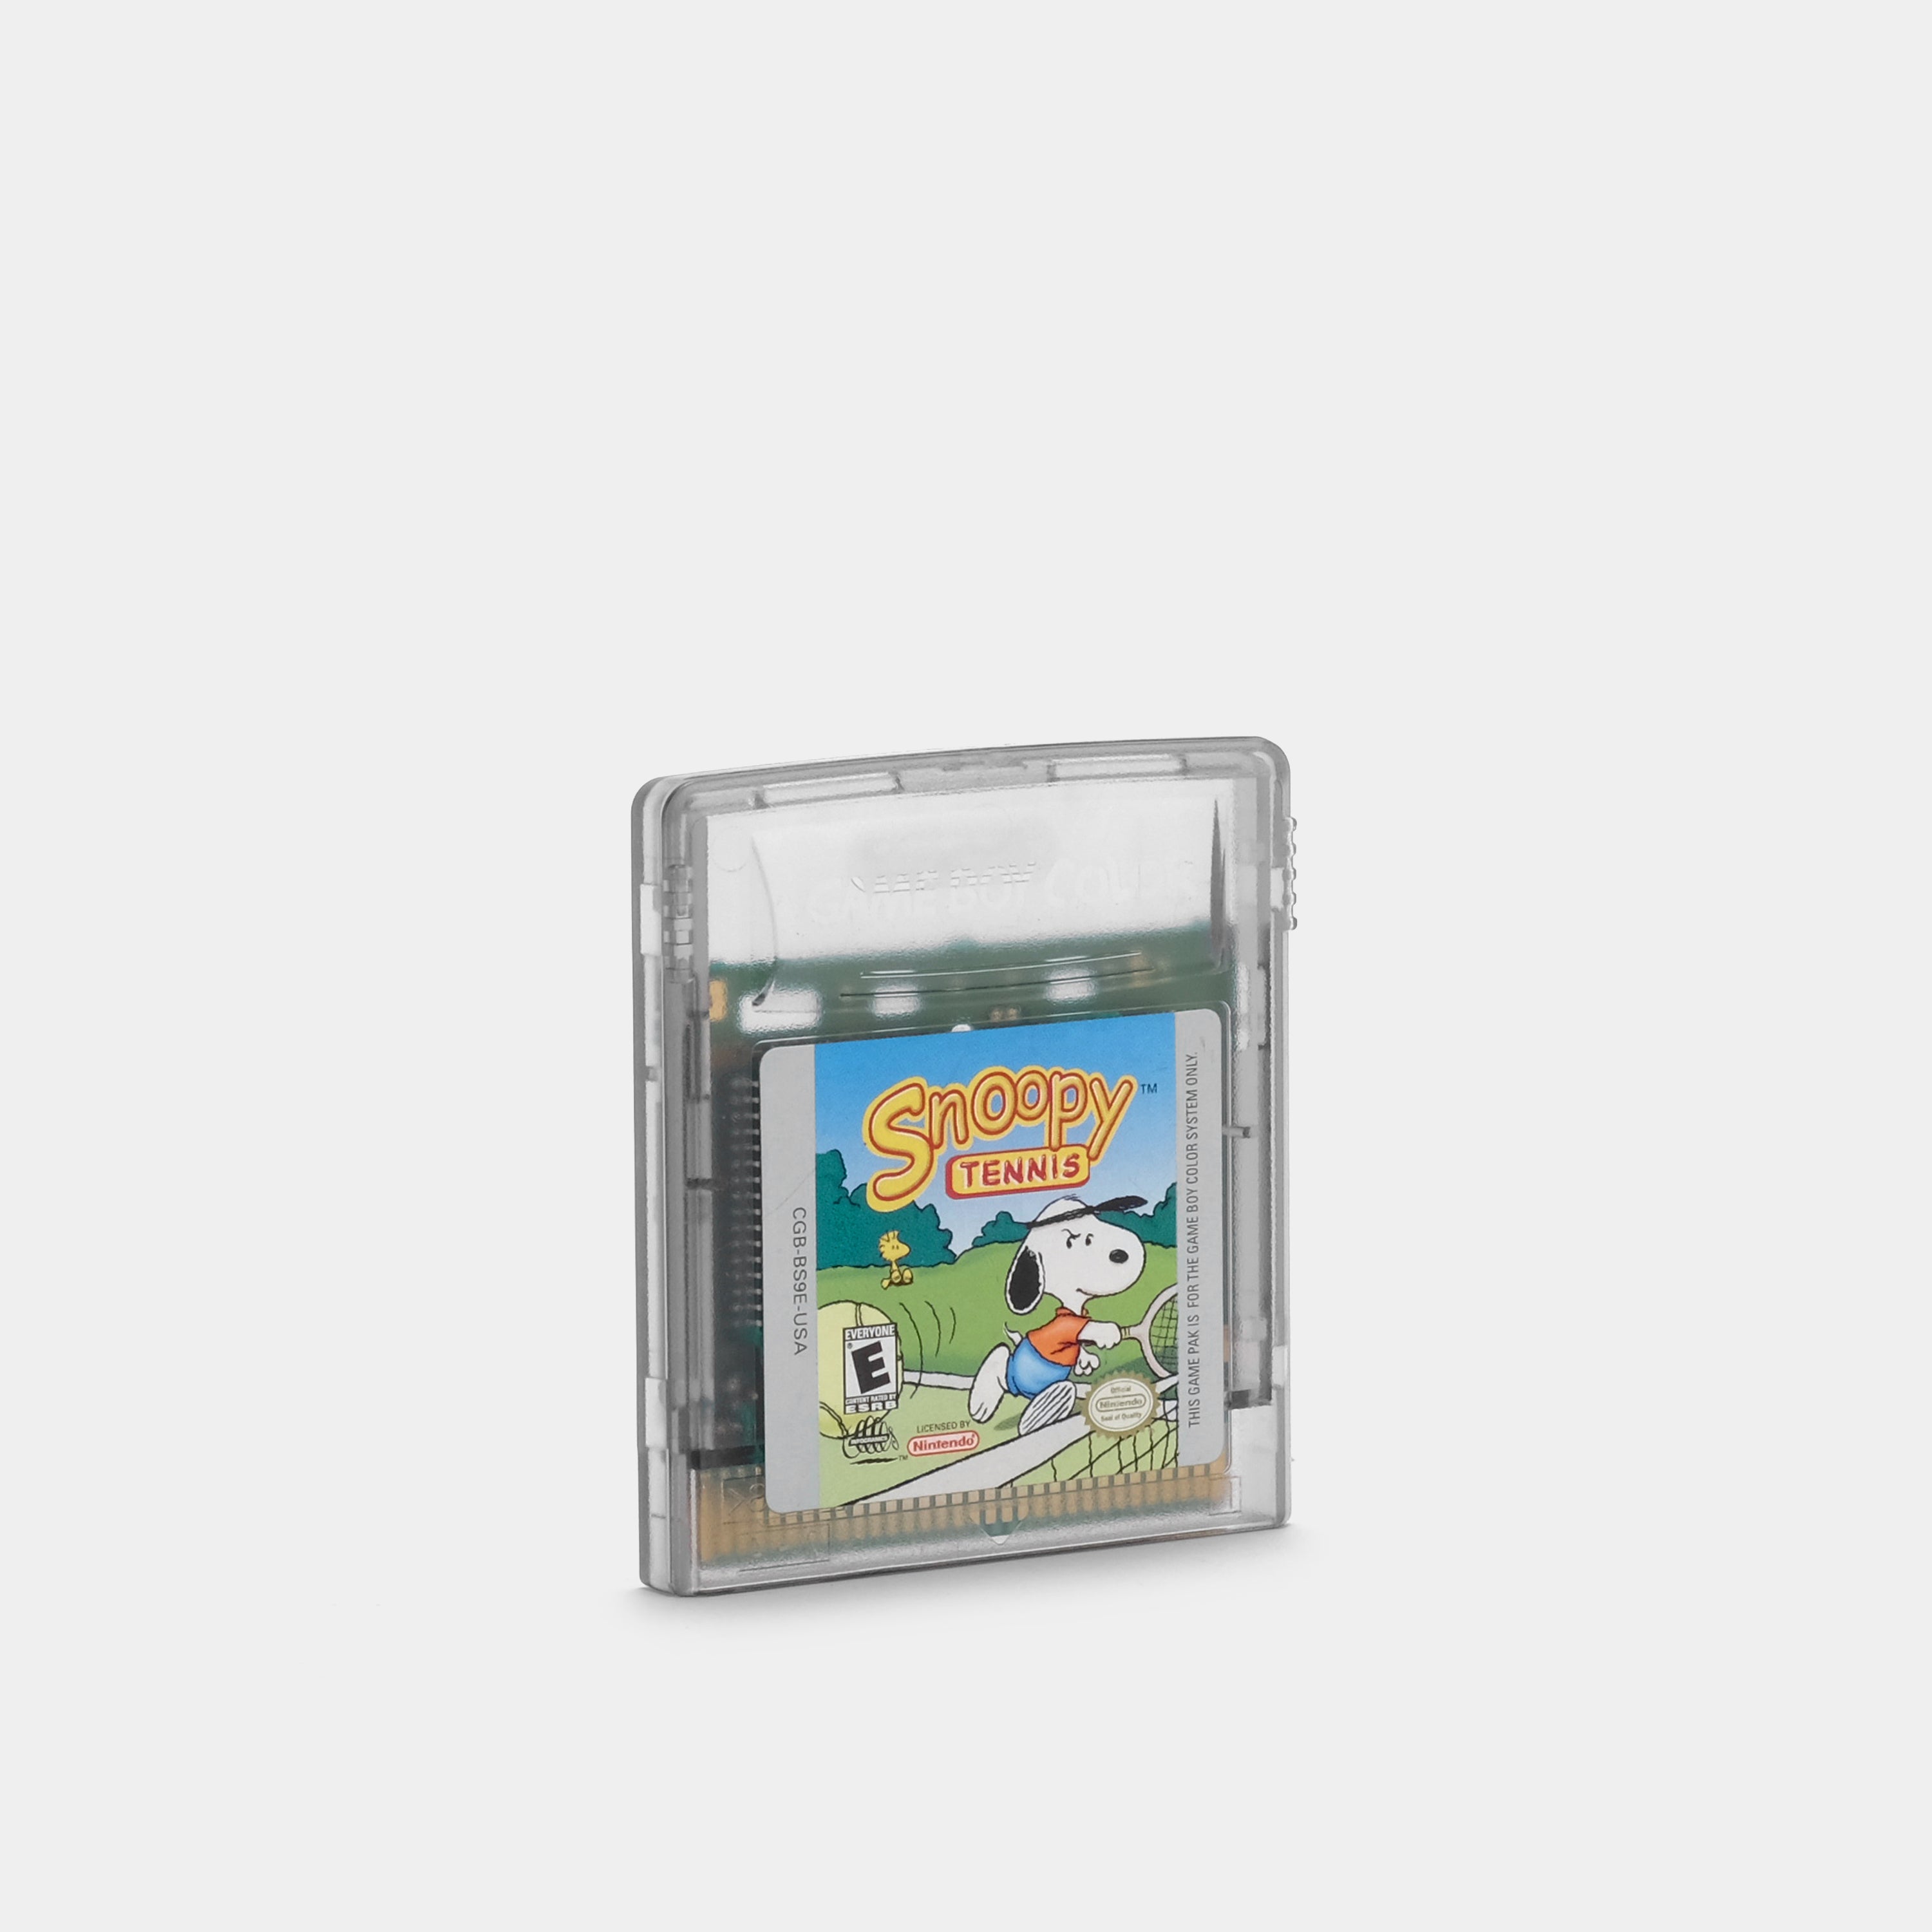 Snoopy Tennis Game Boy Color Game